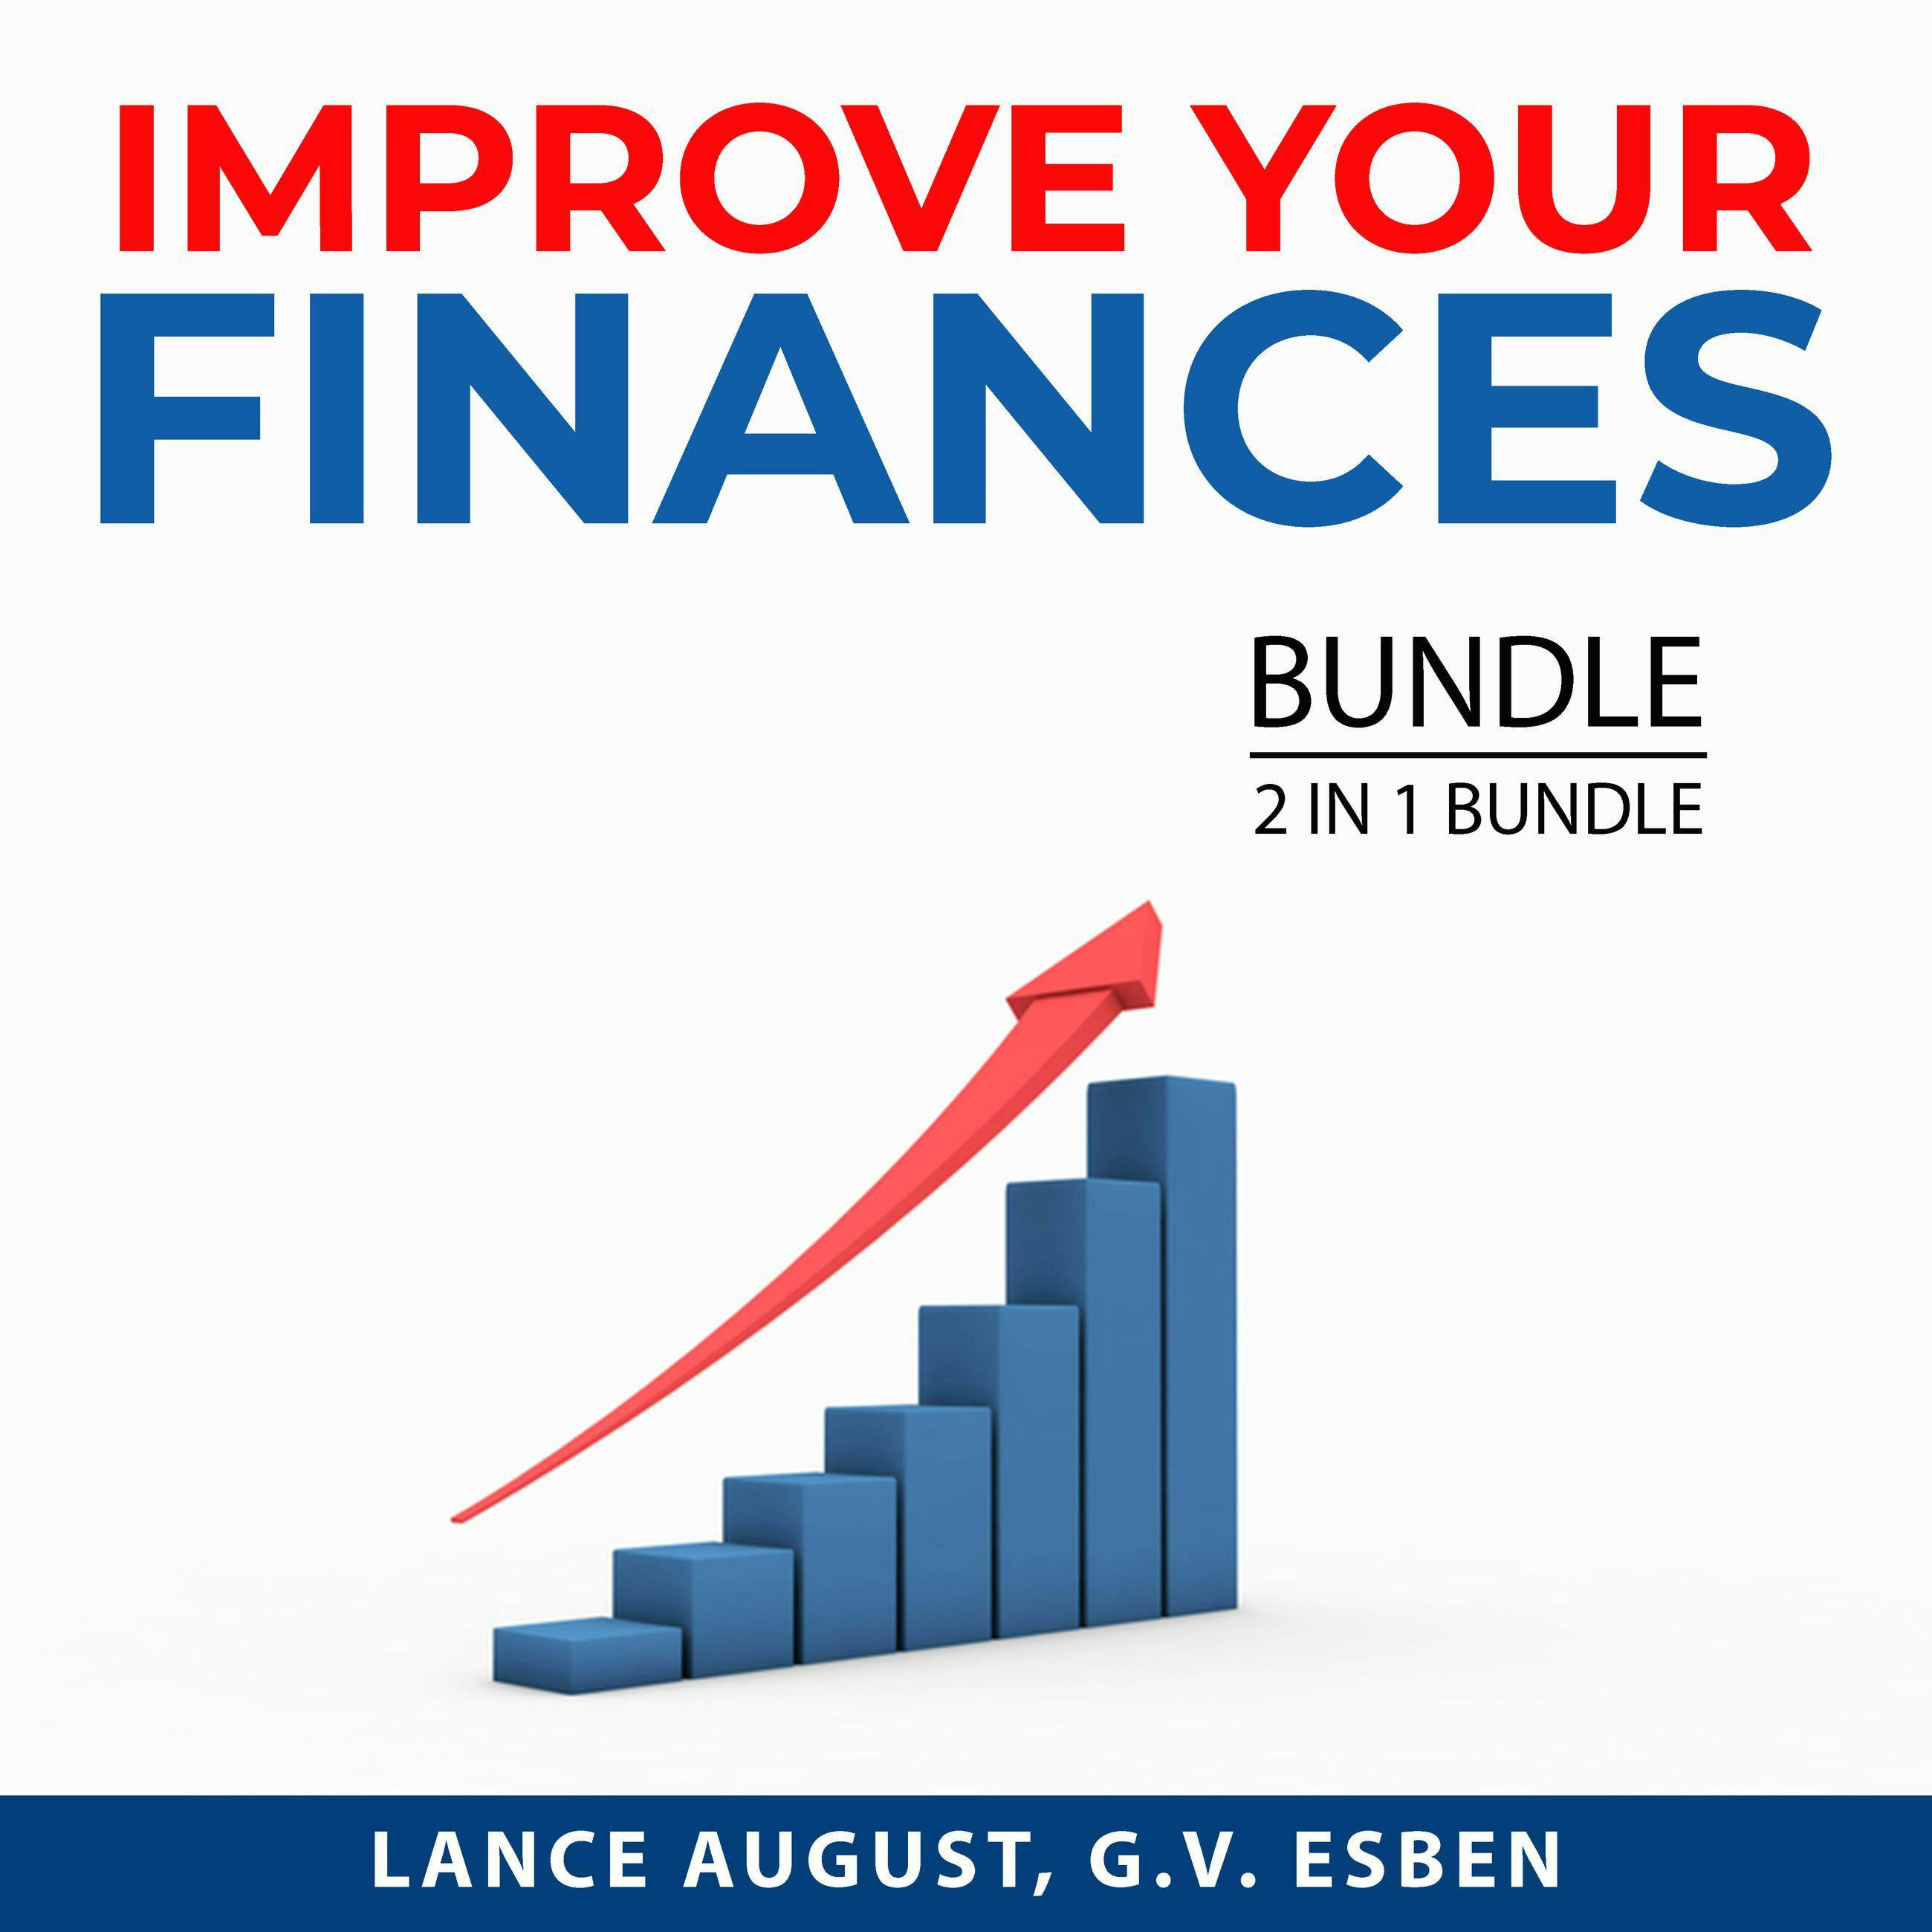 Improve Your Finances Bundle, 2 in 1 Bundle: Financial Independence Blueprint and Passive Income Sources - undefined